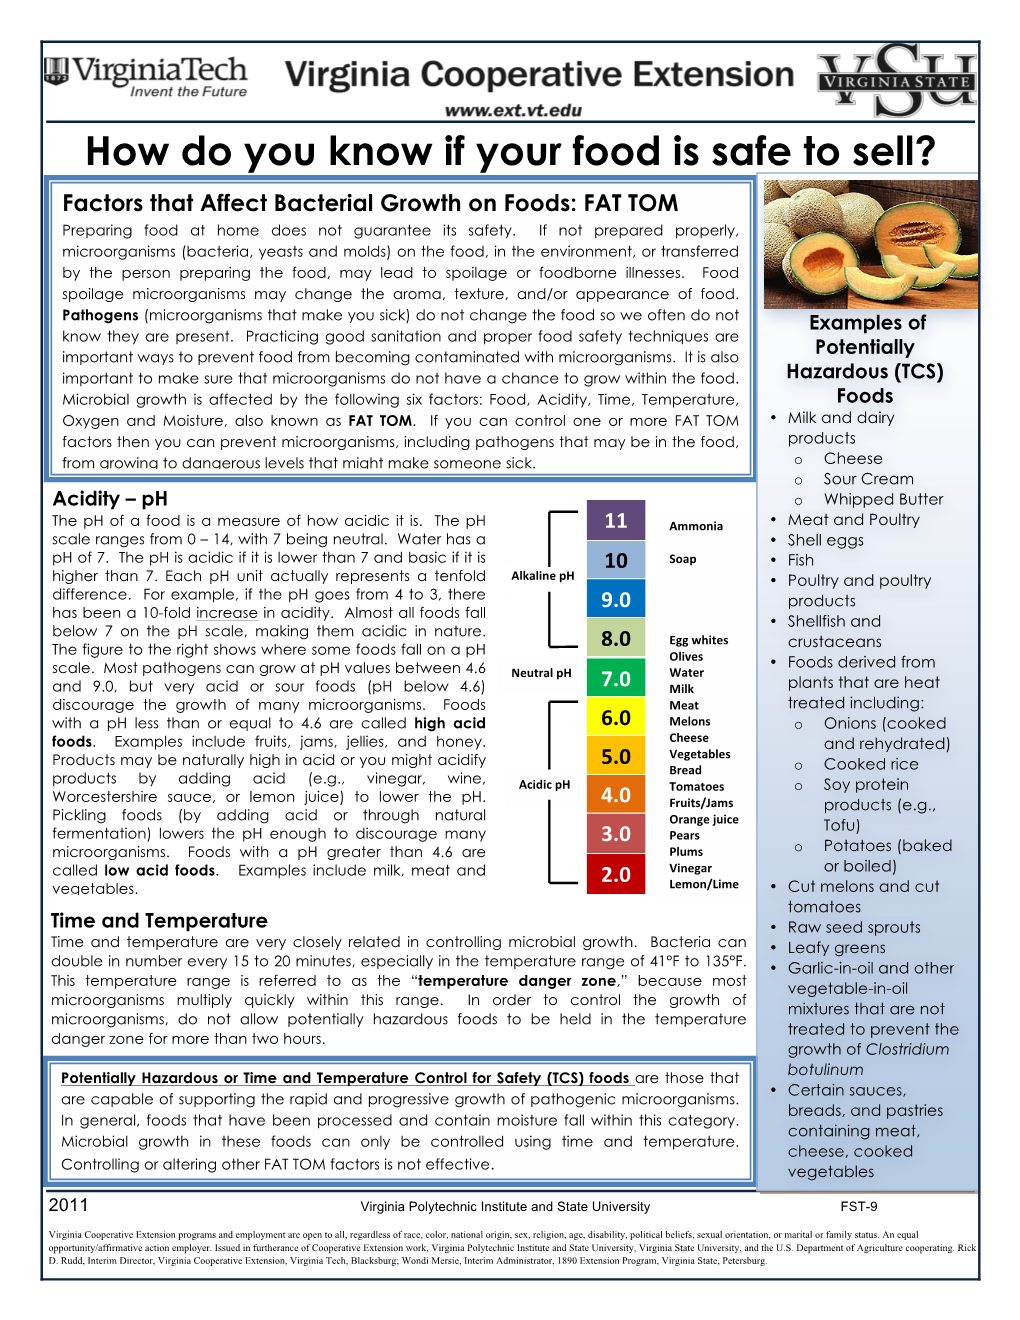 How Do You Know If Your Food Is Safe to Sell? Factors That Affect Bacterial Growth on Foods: FAT TOM Preparing Food at Home Does Not Guarantee Its Safety